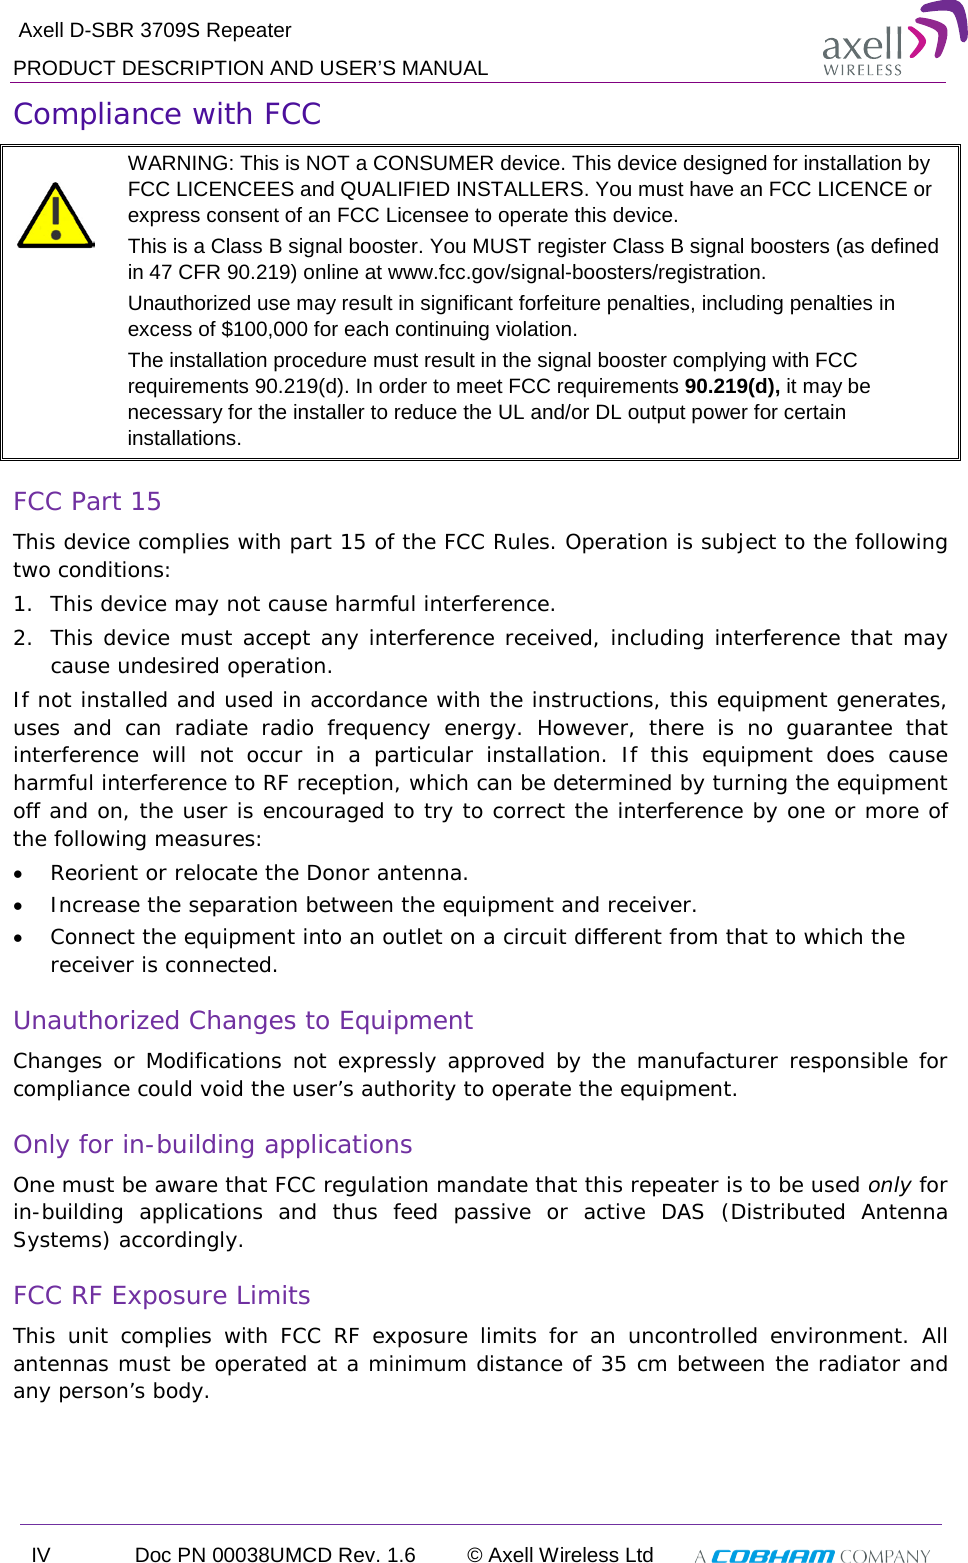  Axell D-SBR 3709S Repeater PRODUCT DESCRIPTION AND USER’S MANUAL IV Doc PN 00038UMCD Rev. 1.6 © Axell Wireless Ltd   Compliance with FCC   WARNING: This is NOT a CONSUMER device. This device designed for installation by FCC LICENCEES and QUALIFIED INSTALLERS. You must have an FCC LICENCE or express consent of an FCC Licensee to operate this device.  This is a Class B signal booster. You MUST register Class B signal boosters (as defined in 47 CFR 90.219) online at www.fcc.gov/signal-boosters/registration.  Unauthorized use may result in significant forfeiture penalties, including penalties in excess of $100,000 for each continuing violation. The installation procedure must result in the signal booster complying with FCC requirements 90.219(d). In order to meet FCC requirements 90.219(d), it may be necessary for the installer to reduce the UL and/or DL output power for certain installations.  FCC Part 15 This device complies with part 15 of the FCC Rules. Operation is subject to the following two conditions:  1. This device may not cause harmful interference.  2. This device must accept any interference received, including interference that may cause undesired operation.  If not installed and used in accordance with the instructions, this equipment generates, uses and can radiate radio frequency energy. However, there is no guarantee that interference will not occur in a particular installation. If this equipment does cause harmful interference to RF reception, which can be determined by turning the equipment off and on, the user is encouraged to try to correct the interference by one or more of the following measures: • Reorient or relocate the Donor antenna. • Increase the separation between the equipment and receiver. • Connect the equipment into an outlet on a circuit different from that to which the receiver is connected. Unauthorized Changes to Equipment Changes or Modifications not expressly approved by the manufacturer responsible for compliance could void the user’s authority to operate the equipment. Only for in-building applications One must be aware that FCC regulation mandate that this repeater is to be used only for in-building applications and thus feed passive or active DAS (Distributed Antenna Systems) accordingly.  FCC RF Exposure Limits This unit complies with FCC RF exposure limits for an uncontrolled environment. All antennas must be operated at a minimum distance of 35 cm between the radiator and any person’s body.  